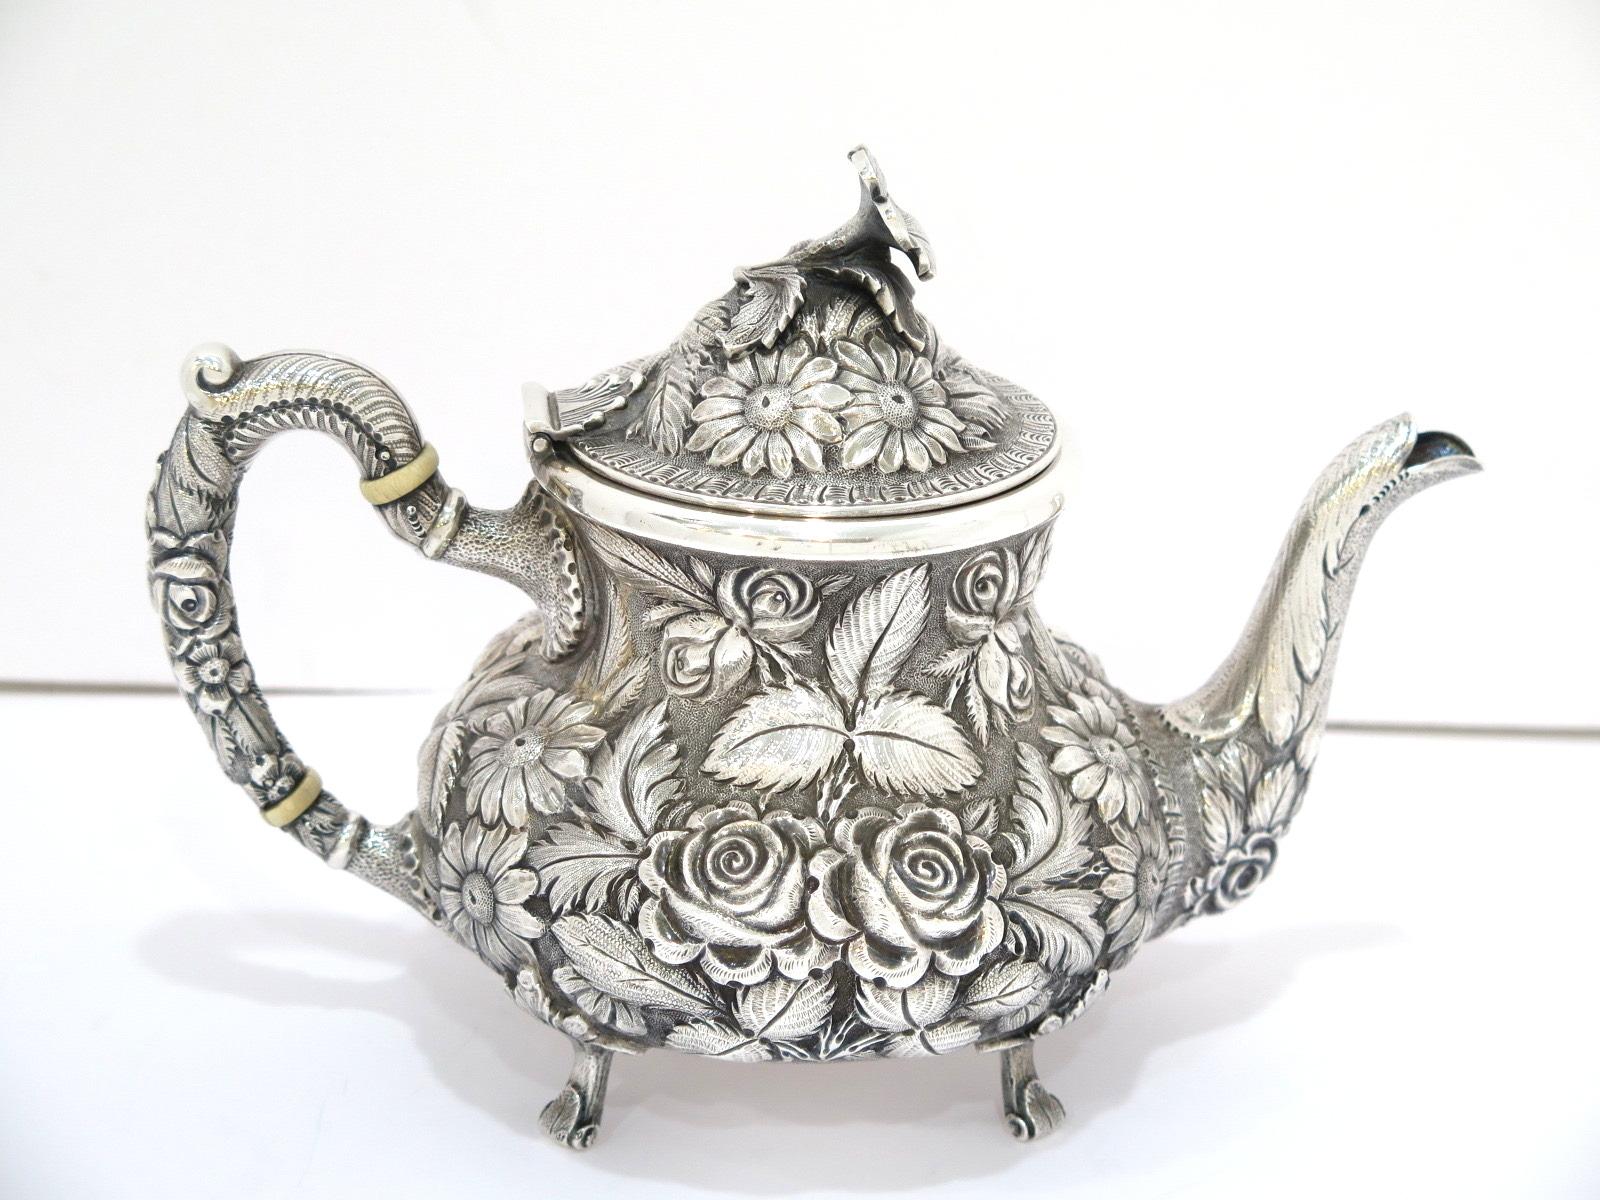 American 3 Piece-Sterling Silver Stieff Vintage Floral Repousse Tea / Coffee Service For Sale